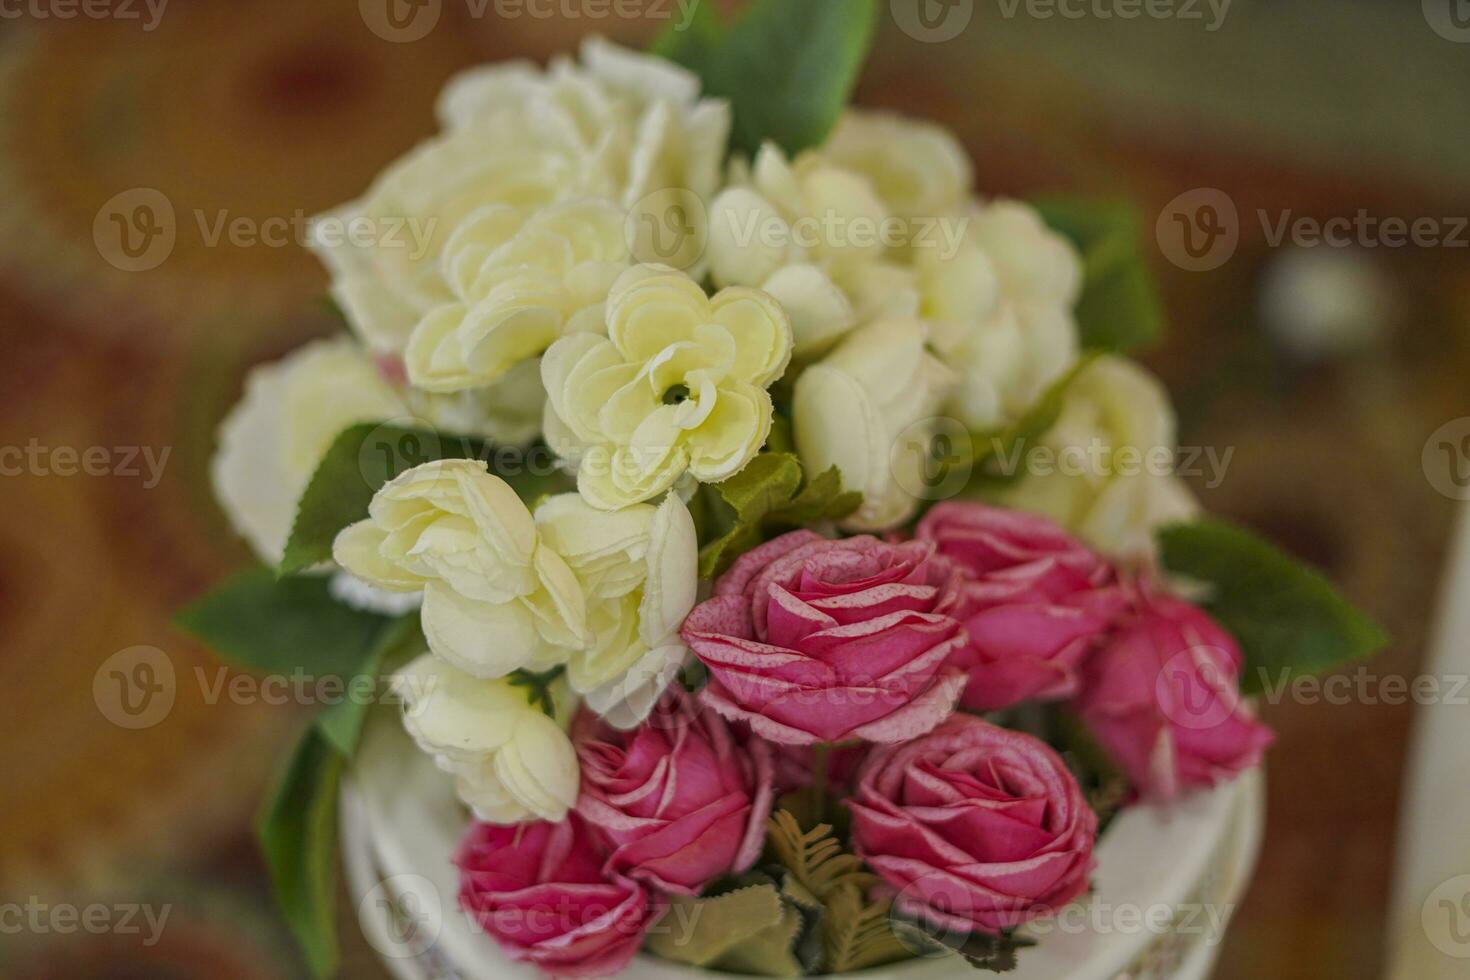 A bouquet of white roses in a cup on a wooden table photo